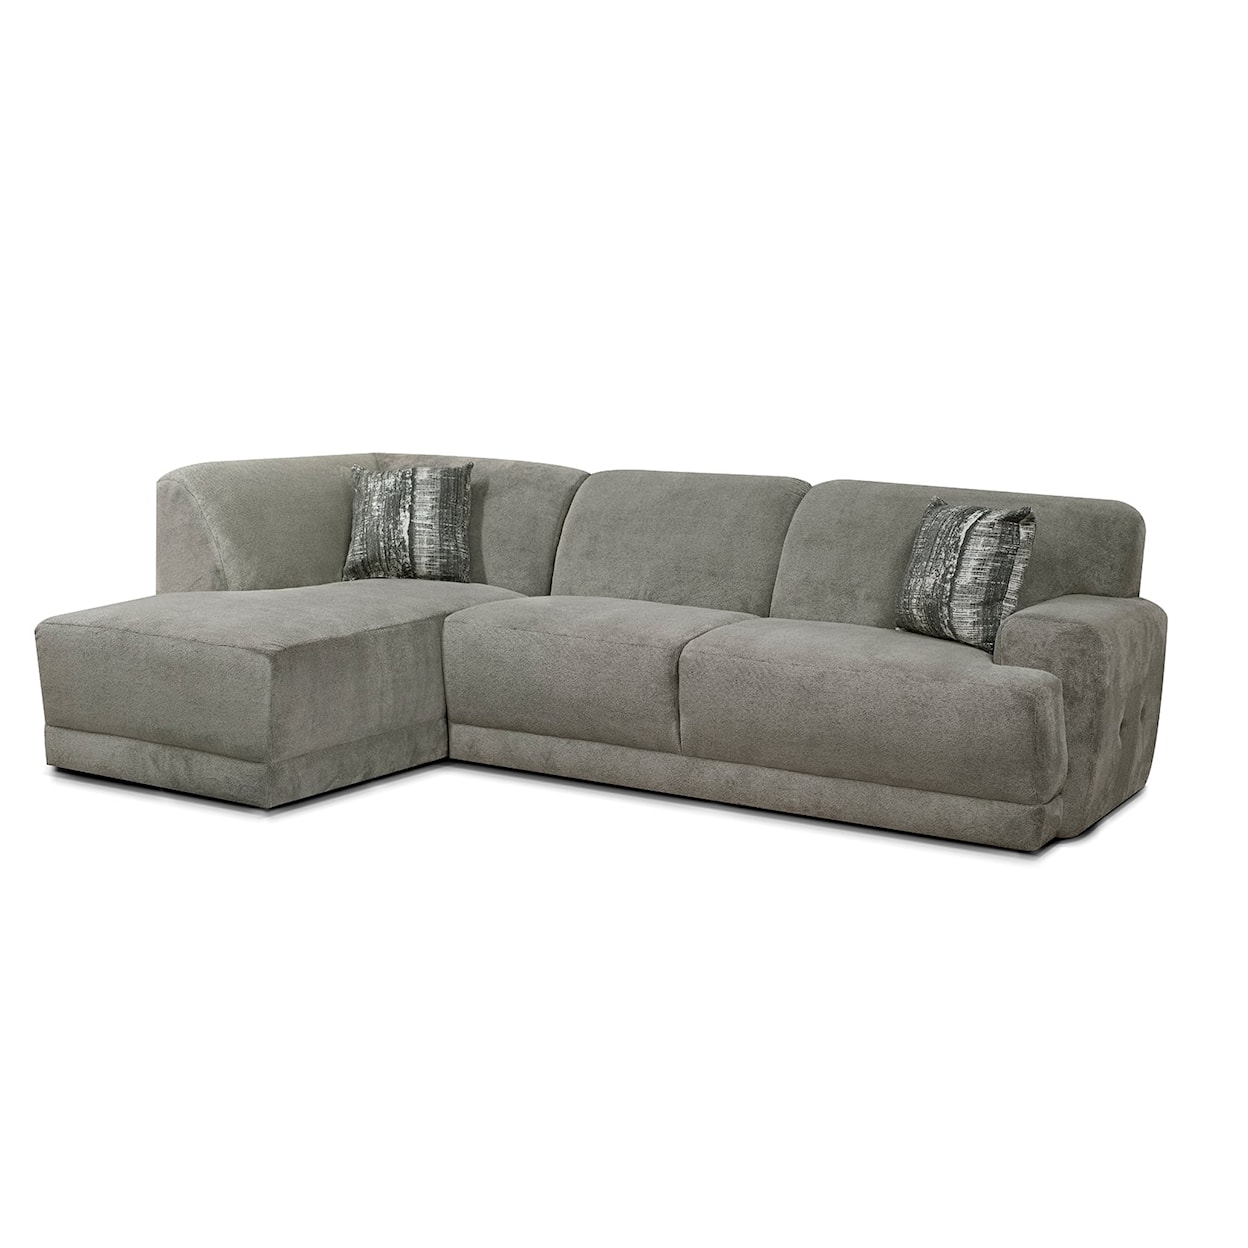 Tennessee Custom Upholstery 2880 Series Sectional Sofa with Left Facing Chaise